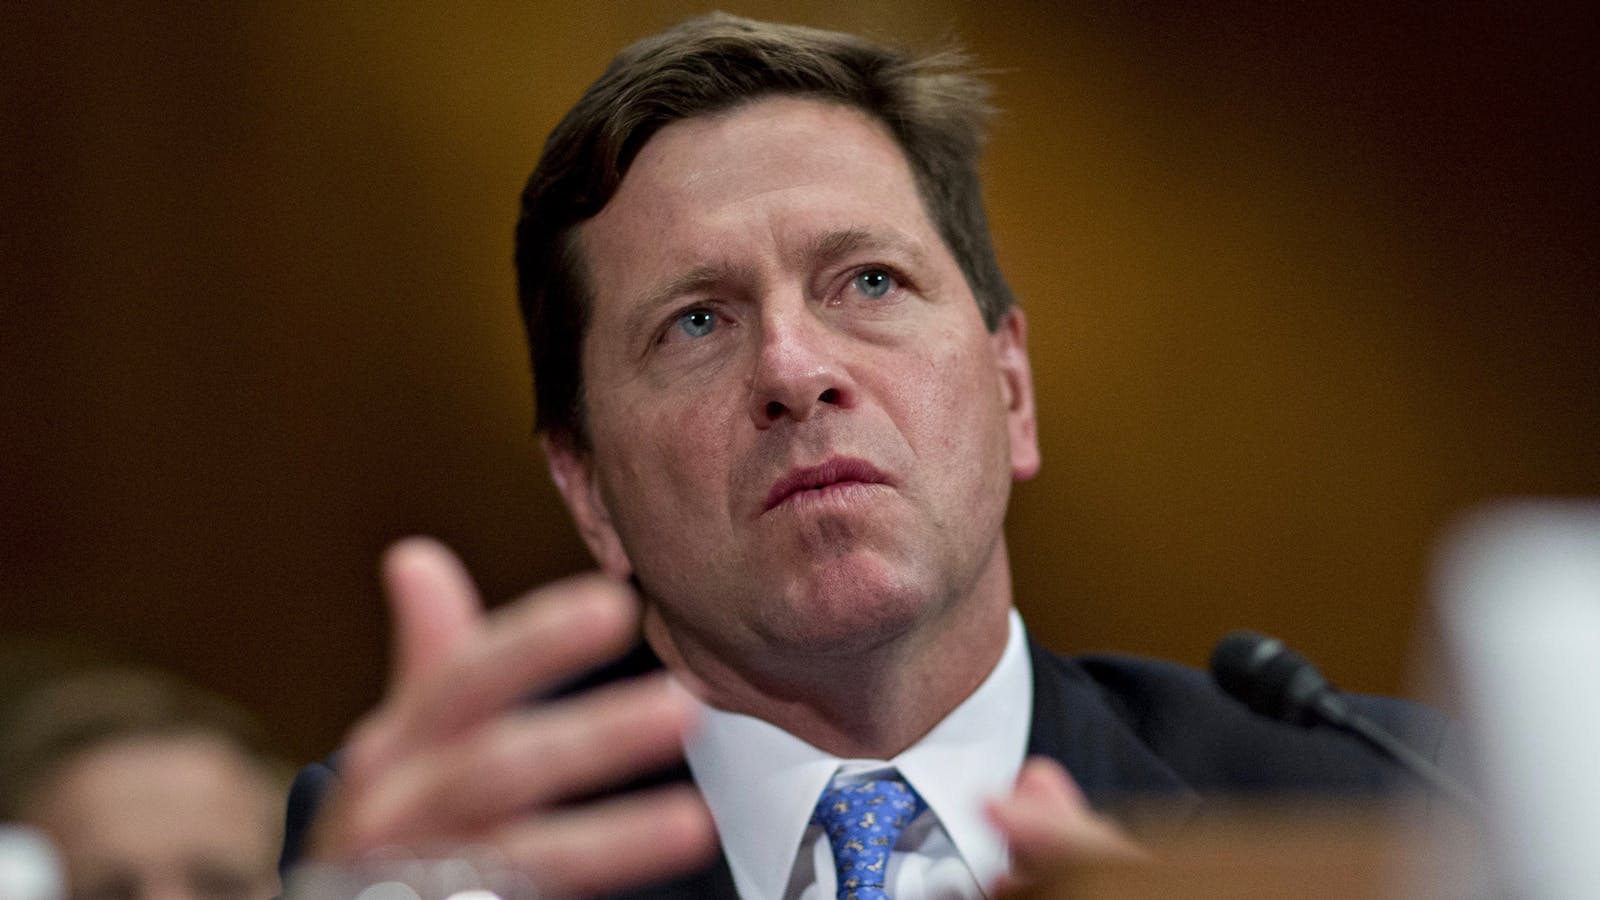 The SEC's new chair Jay Clayton speaking at a congressional hearing in June. Photo by Bloomberg.